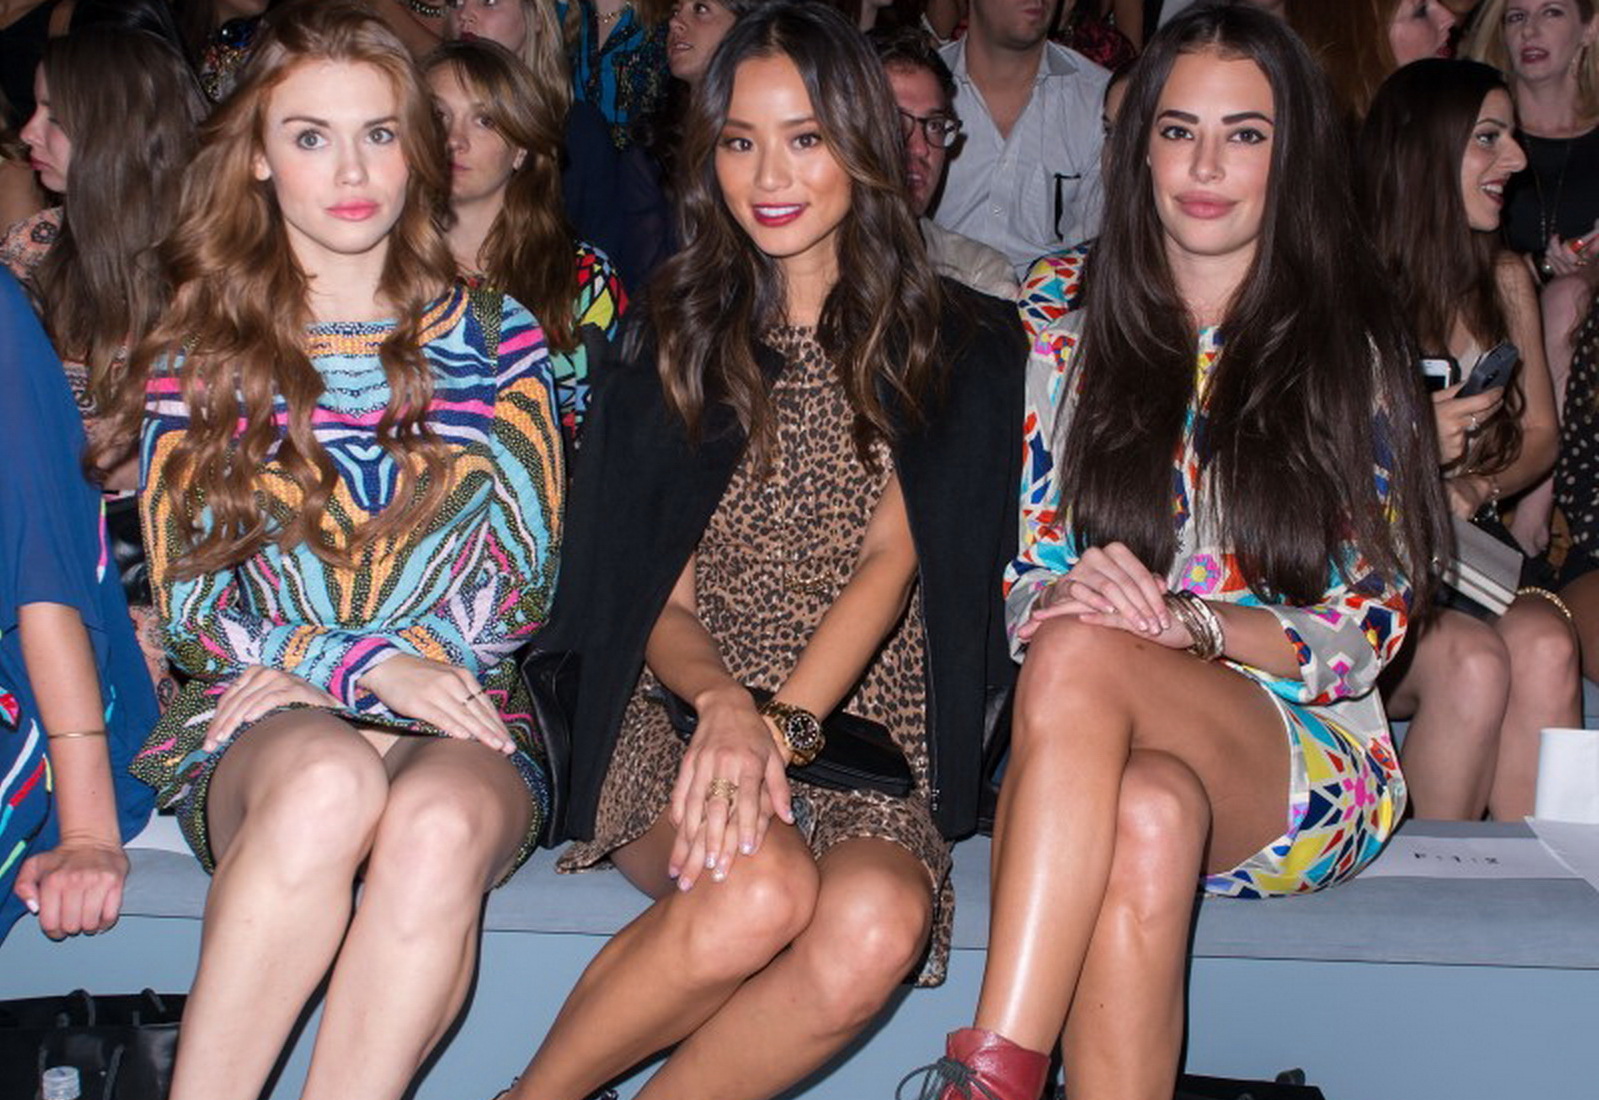 Holland-Roden-Upskirt-No-Panties-Pictures-At-Mara-Hoffman-Fashion-Show-In-NY-14.jpg